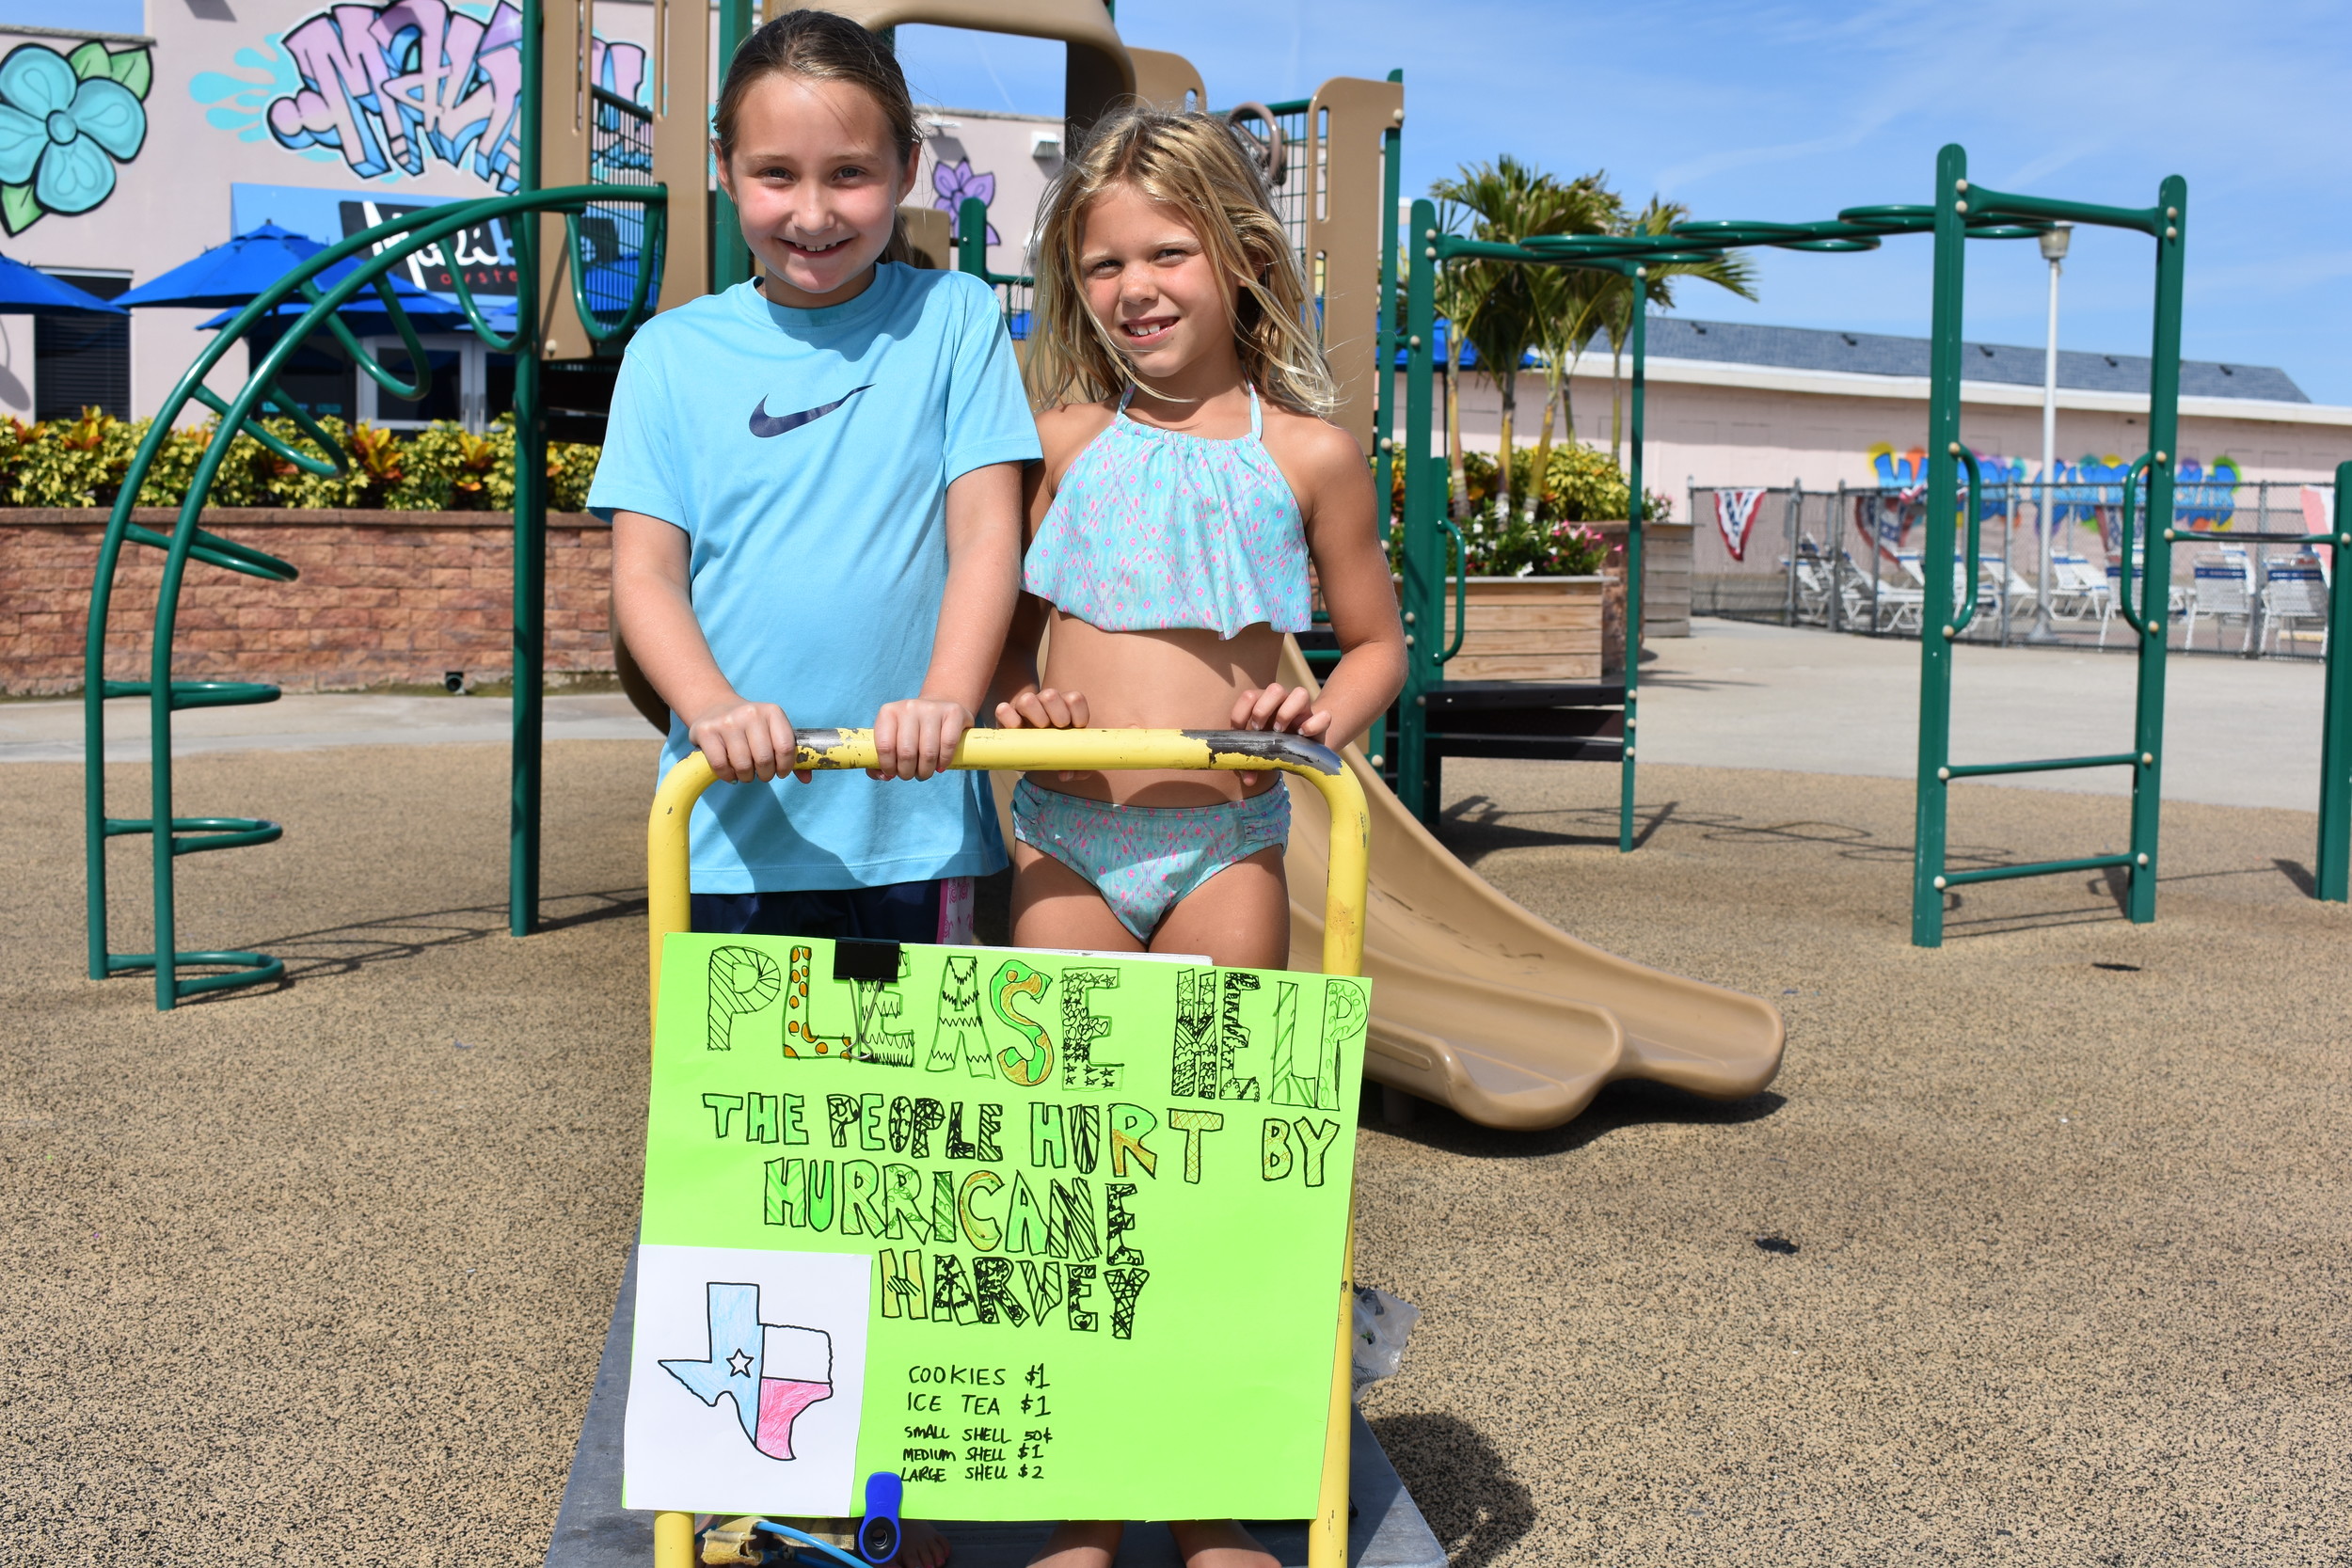 Rockville Centre resident  Kiersten Brull, 7, right, with her friend Maeve Martin, raised money for Hurricane Harvey victims by selling seashells, iced tea and cookies.